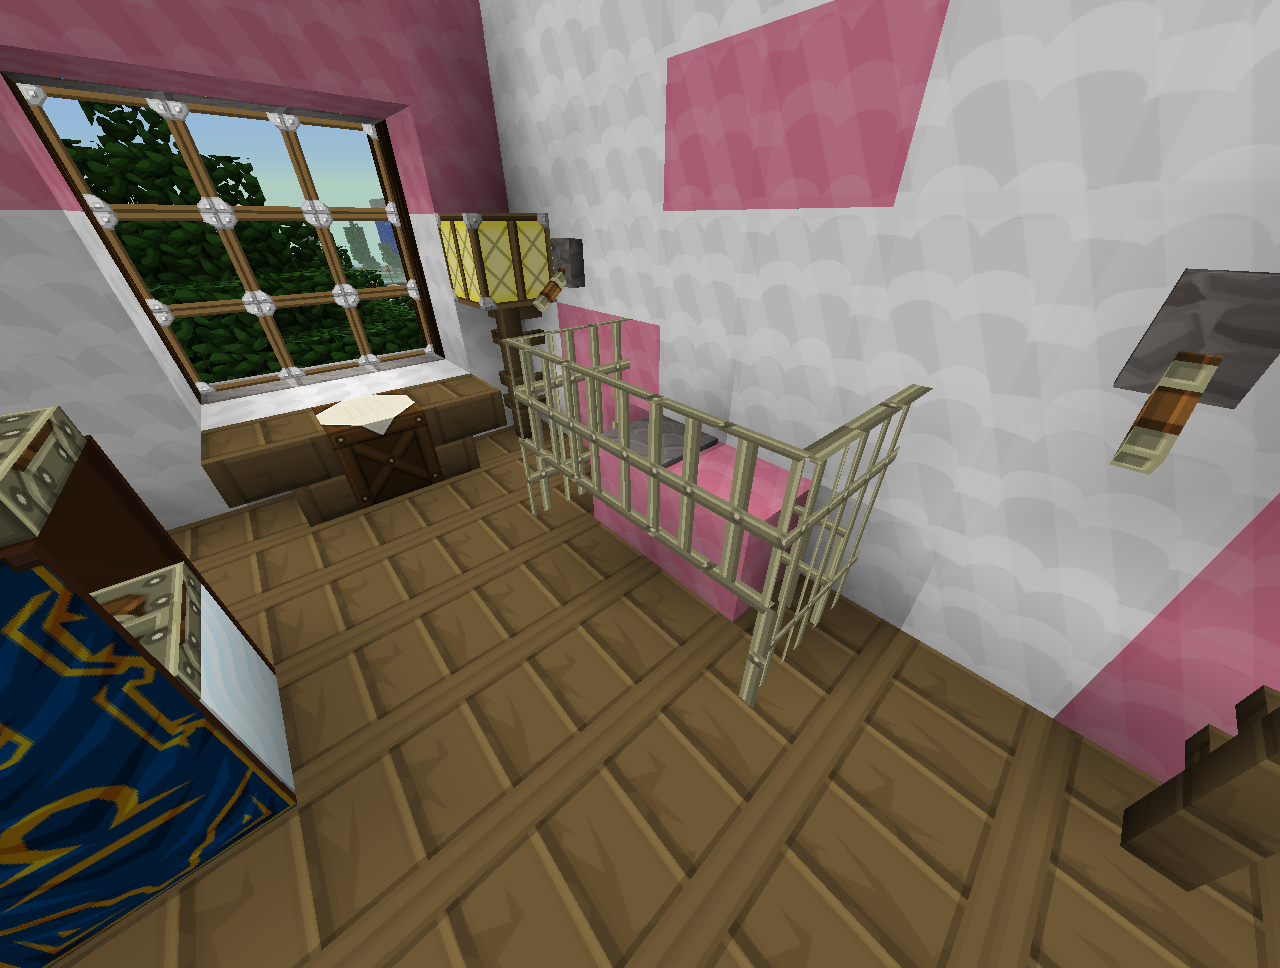 Minecraft Wallpaper For Your Bedroom On, How To Make A Cool Bedroom In Minecraft